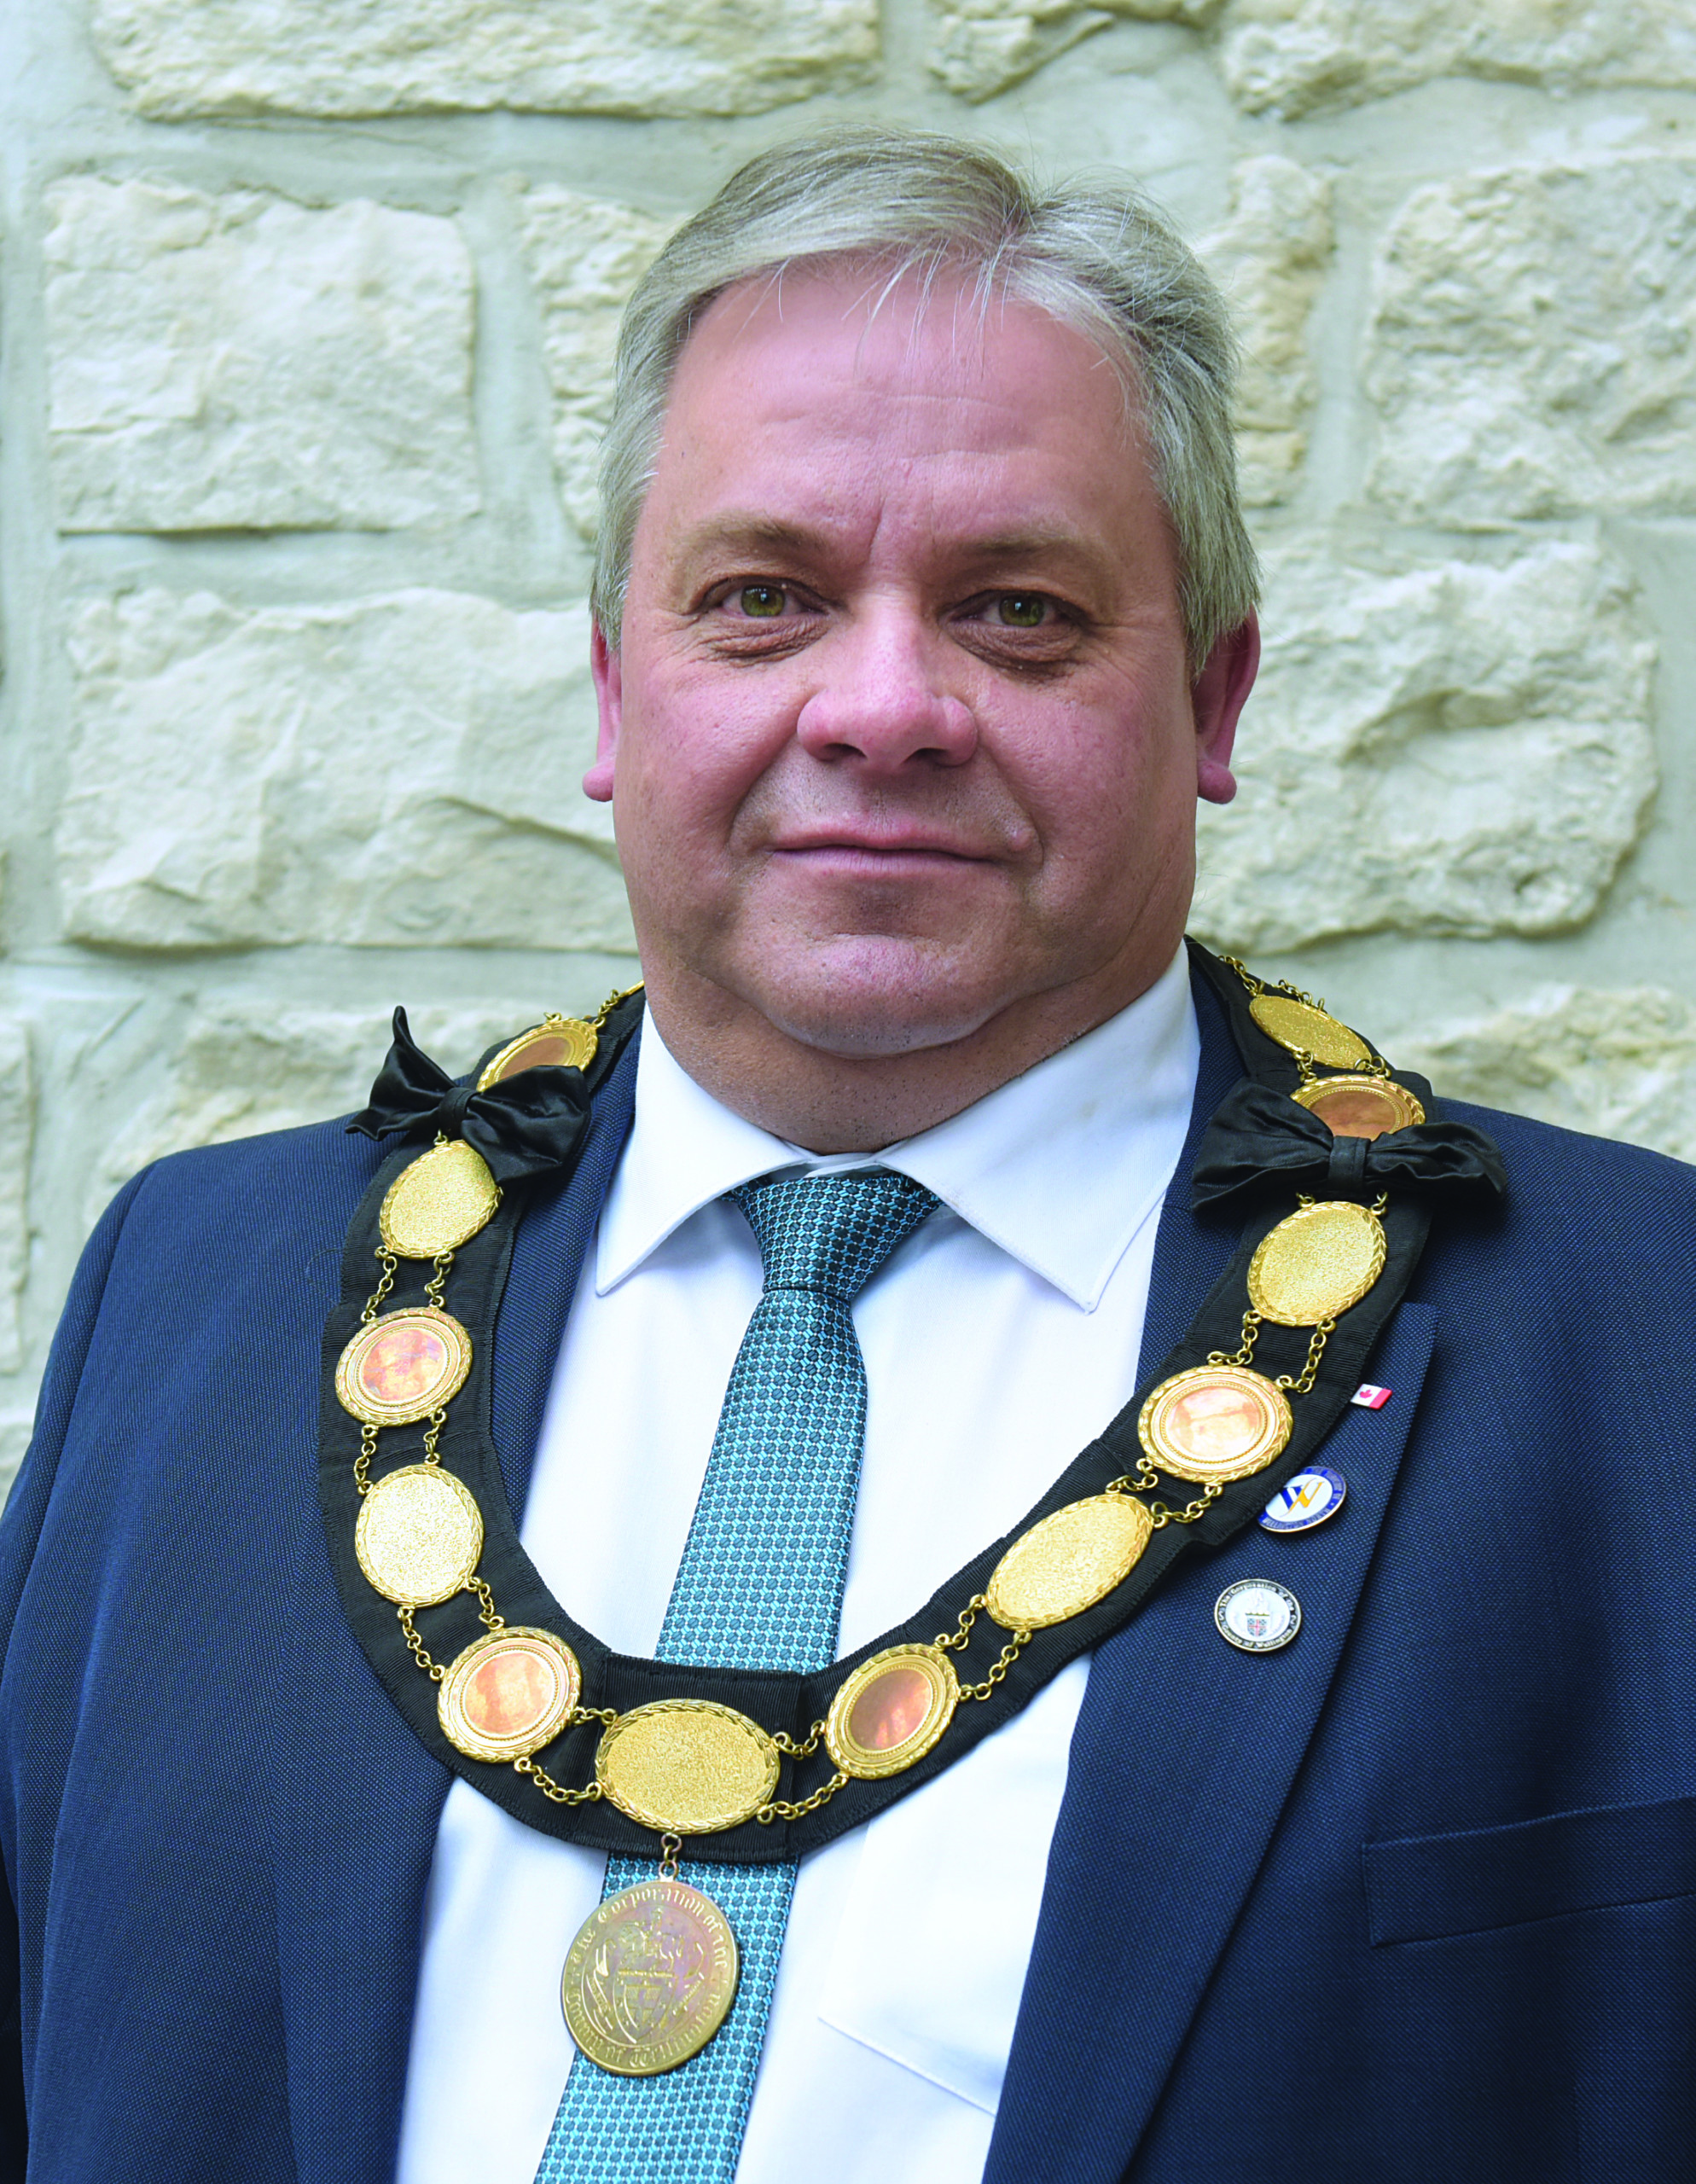 wellington north mayor elected as county warden scaled